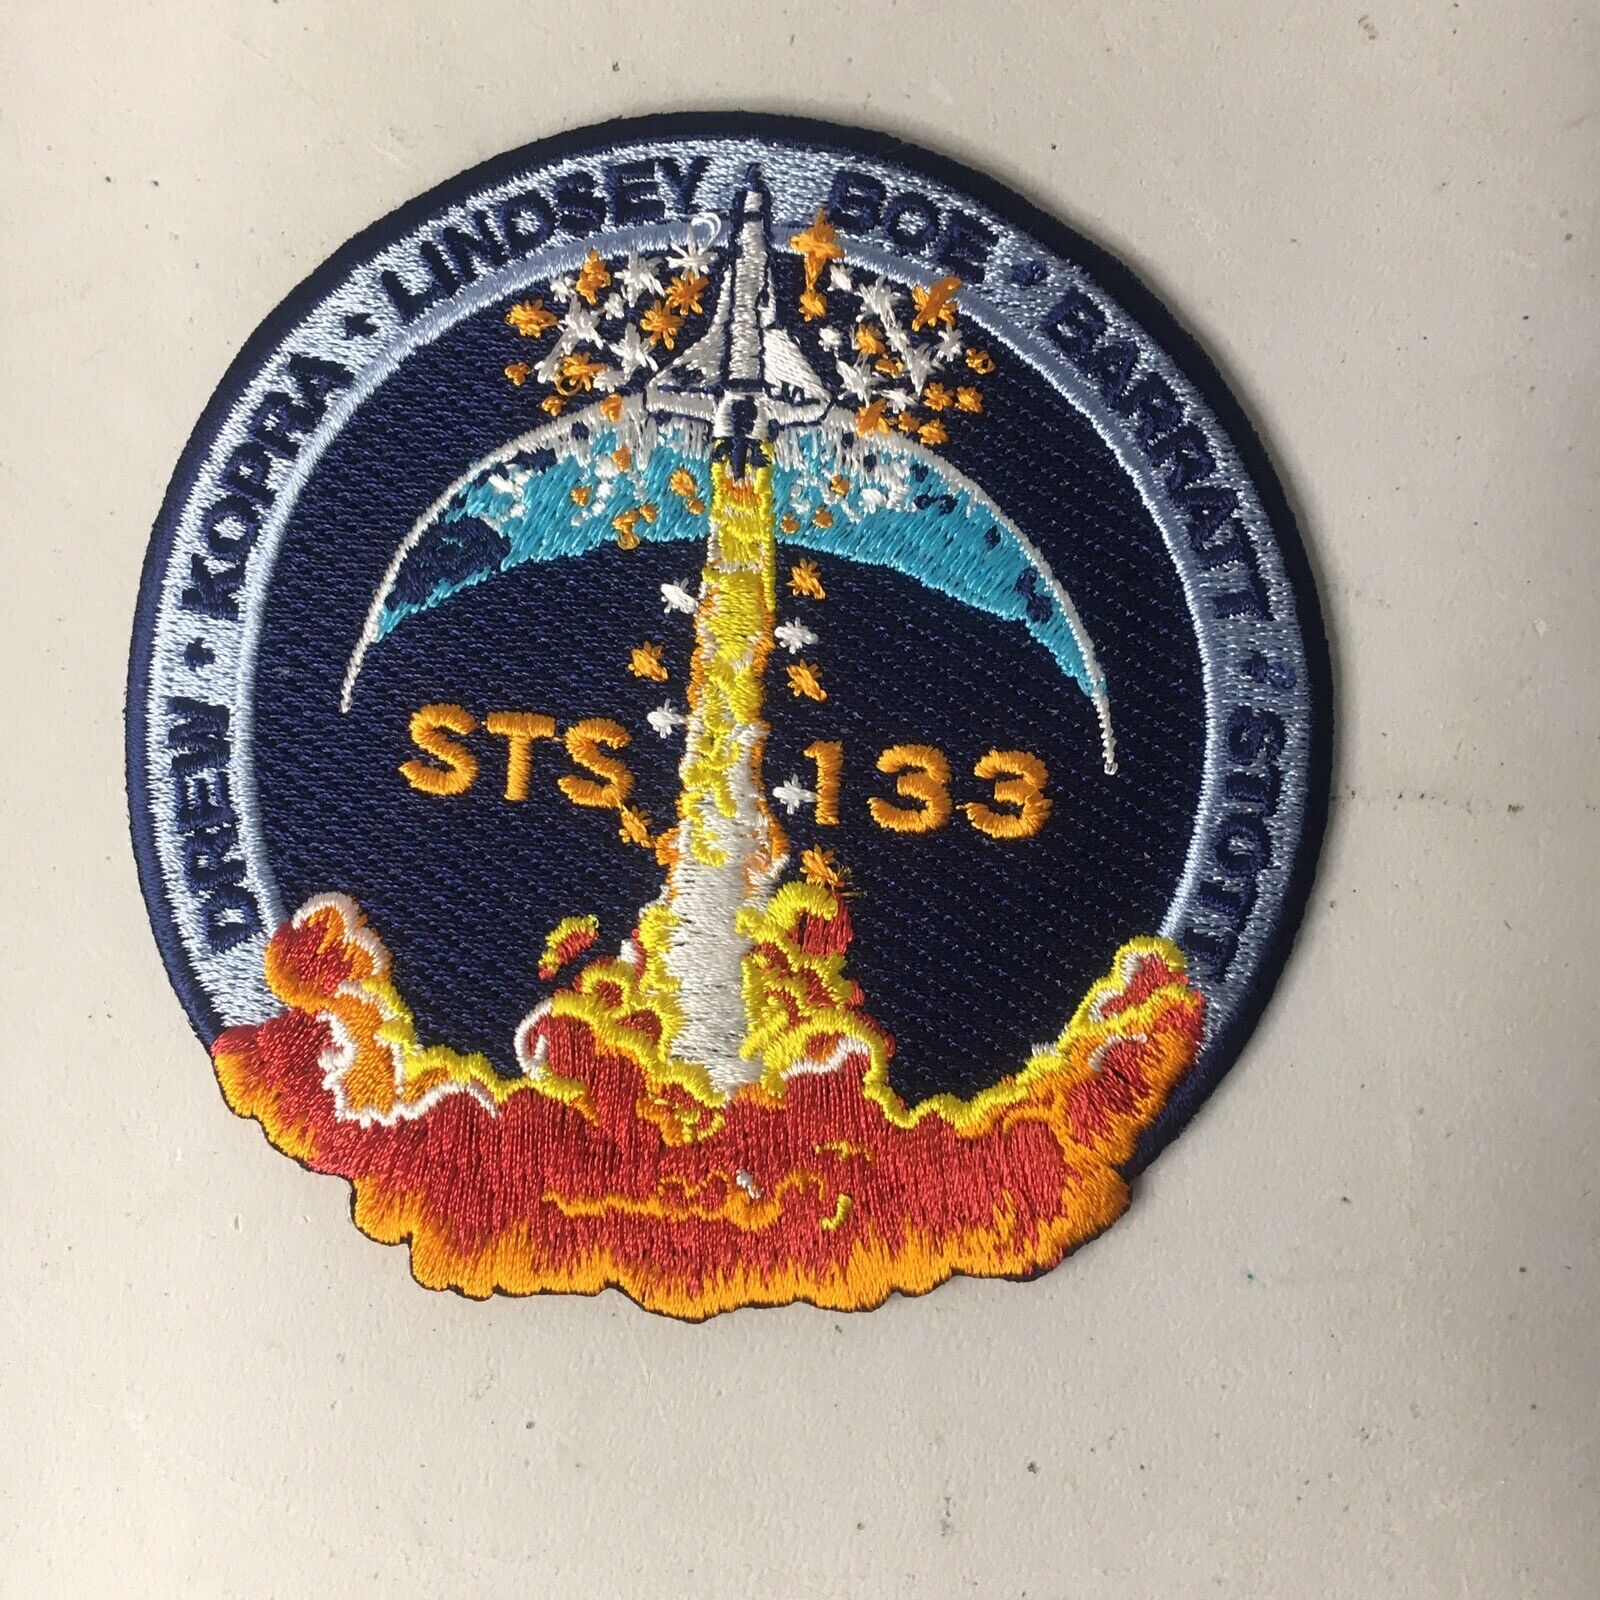 STS-133 NASA space shuttle mission patch : Last Flight of Discovery  * 4\